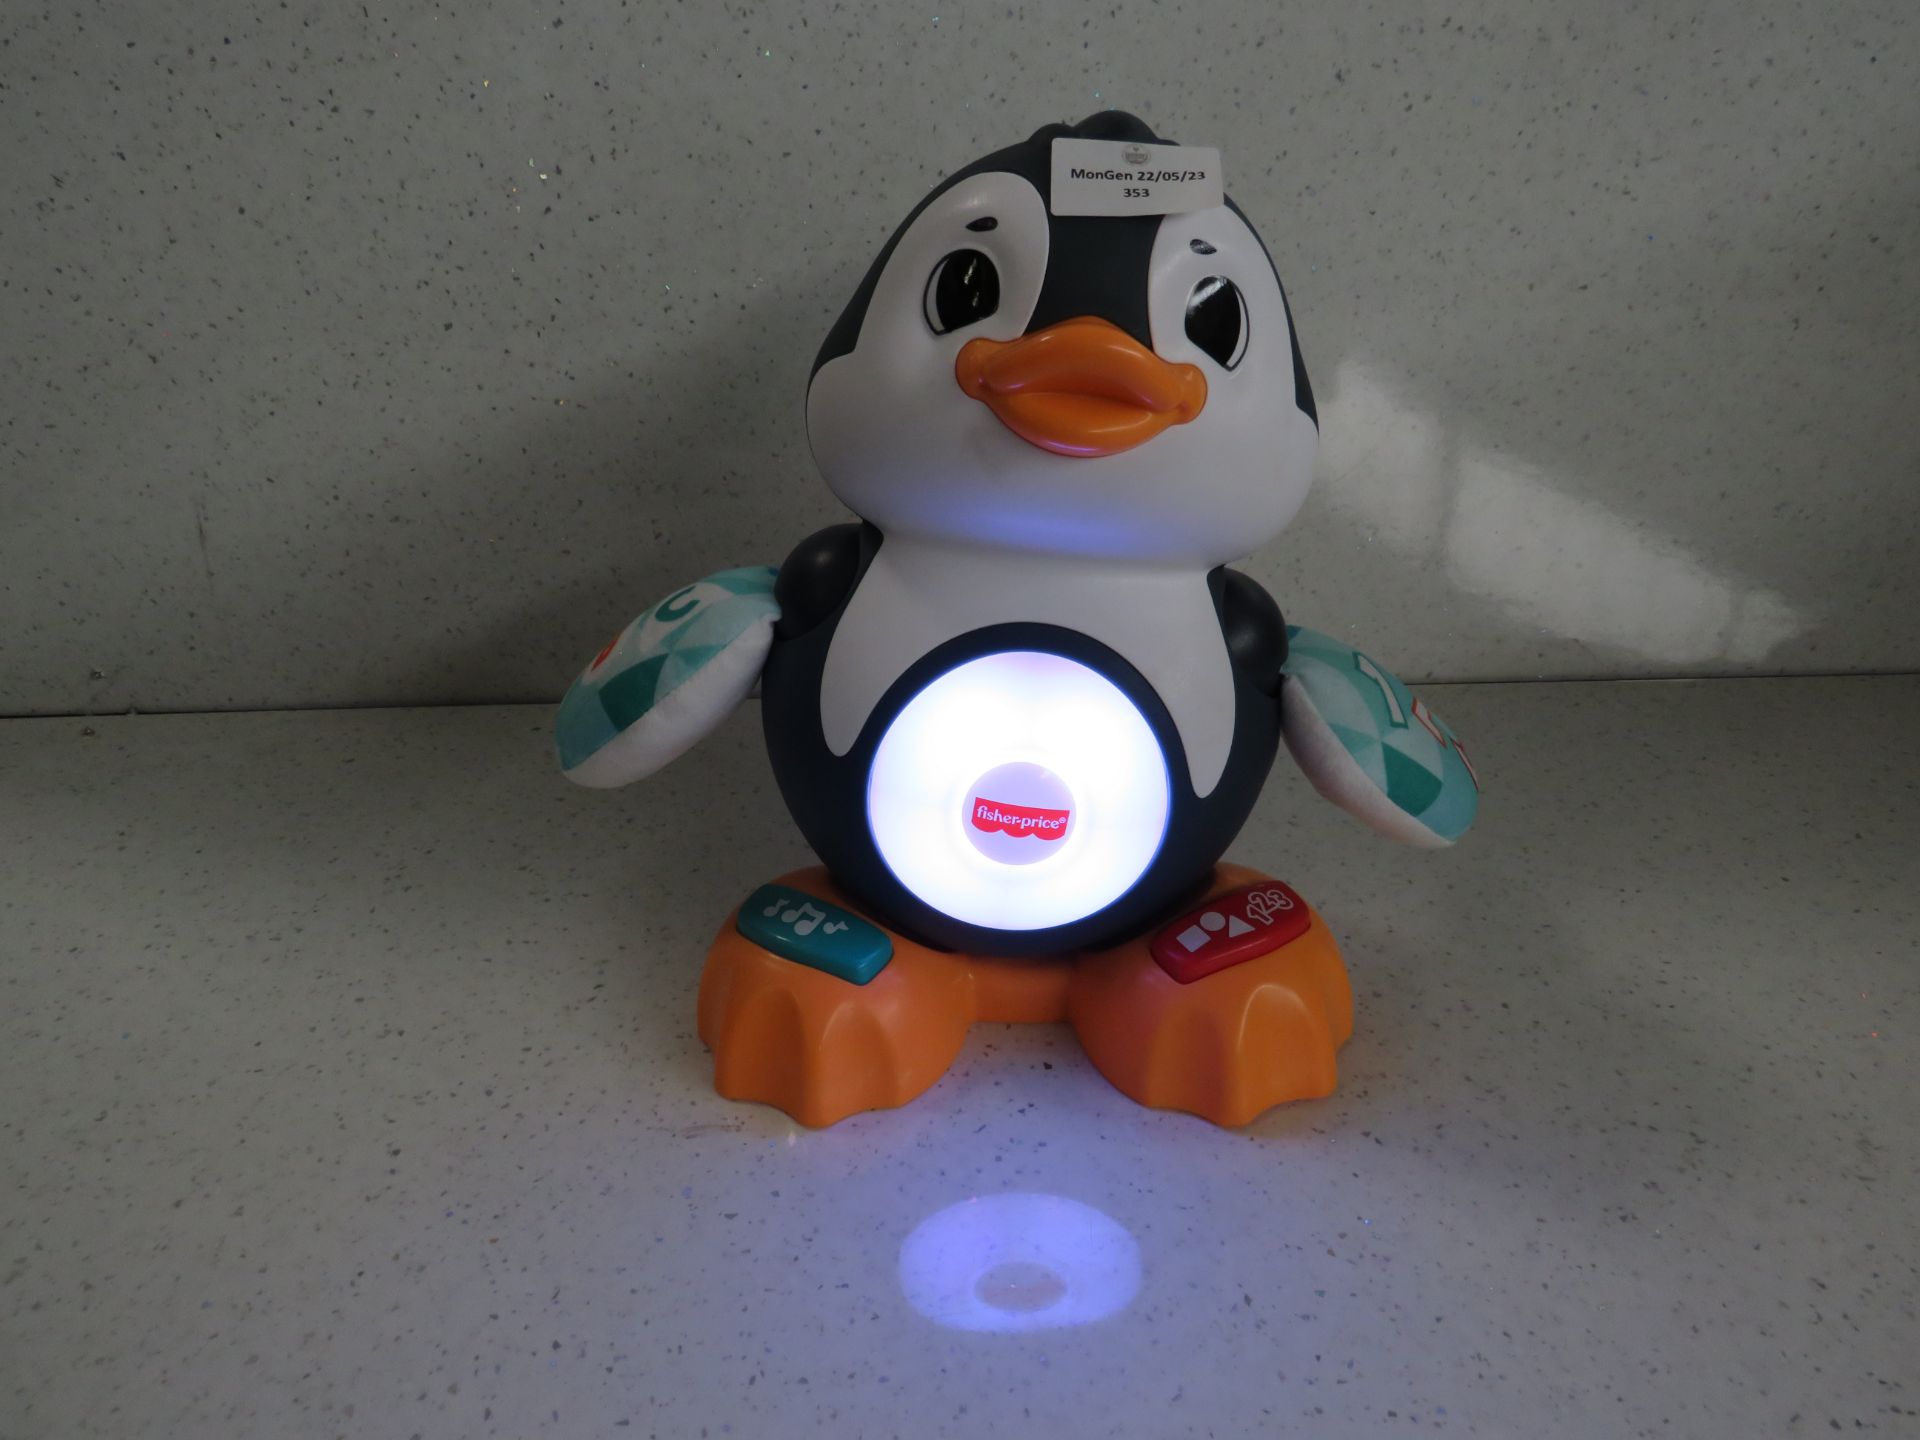 Fisher-Price - Penguine Inter-Active Toys - Tested Working, No Packaging.